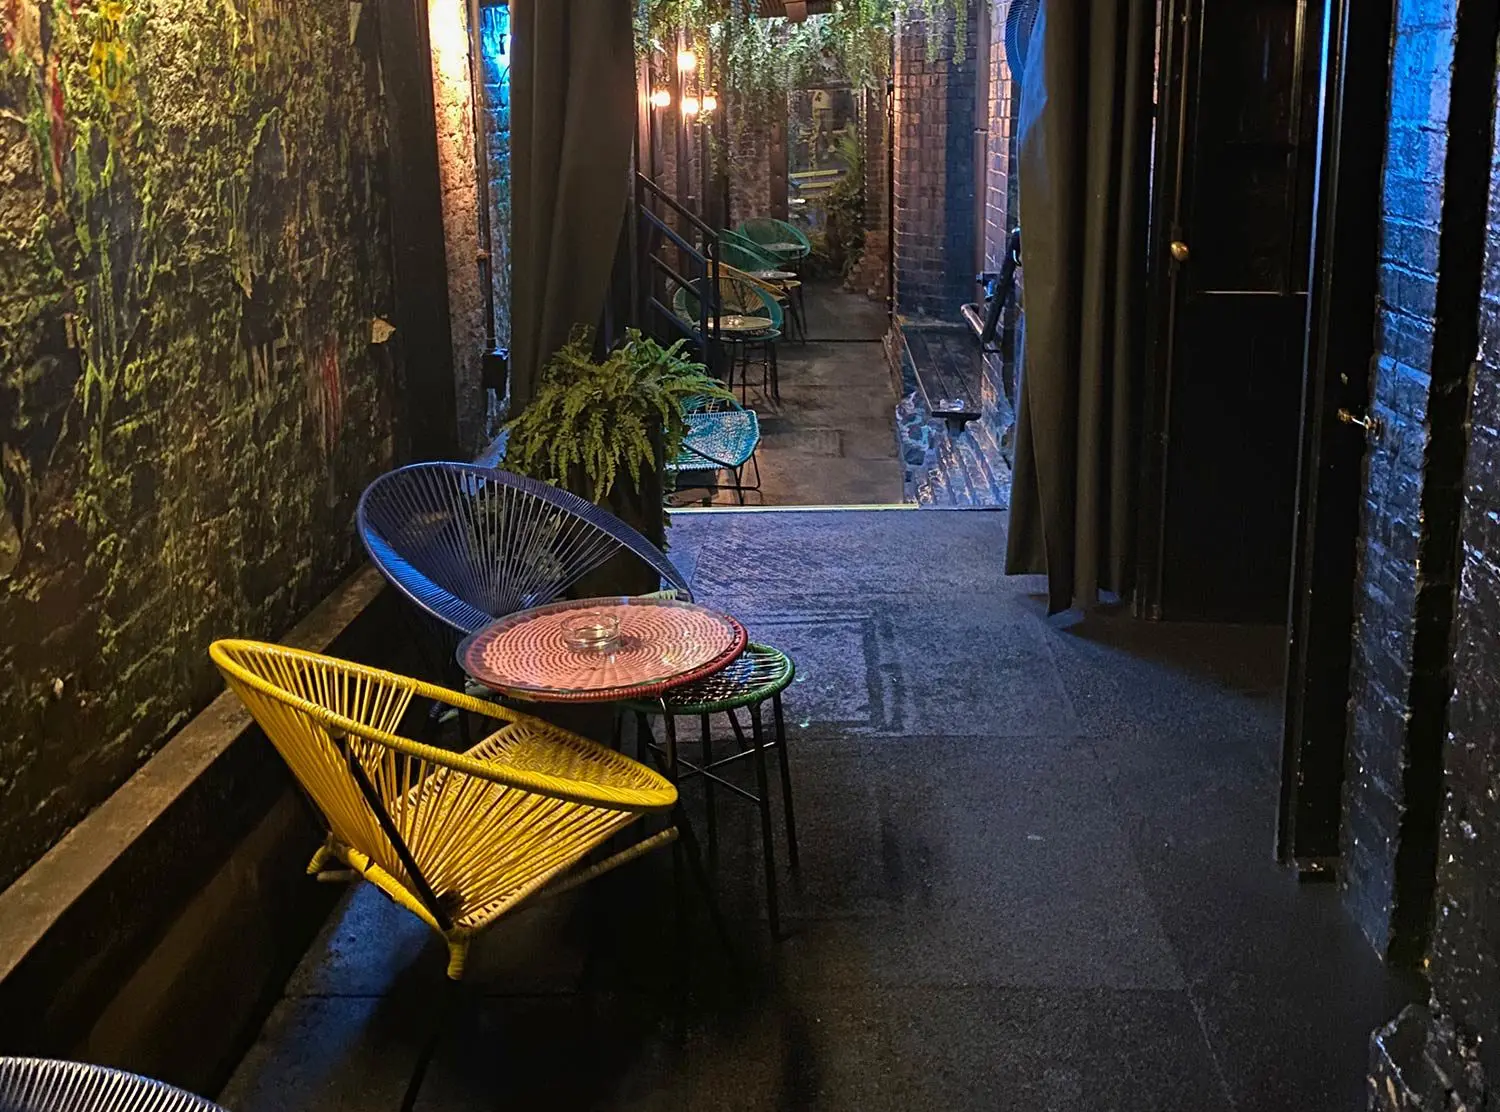 Chiltern Firehouse Secret smoking area. At night this is where we always ended up hanging out for hours. You have to walk through the downstairs bathrooms to find it